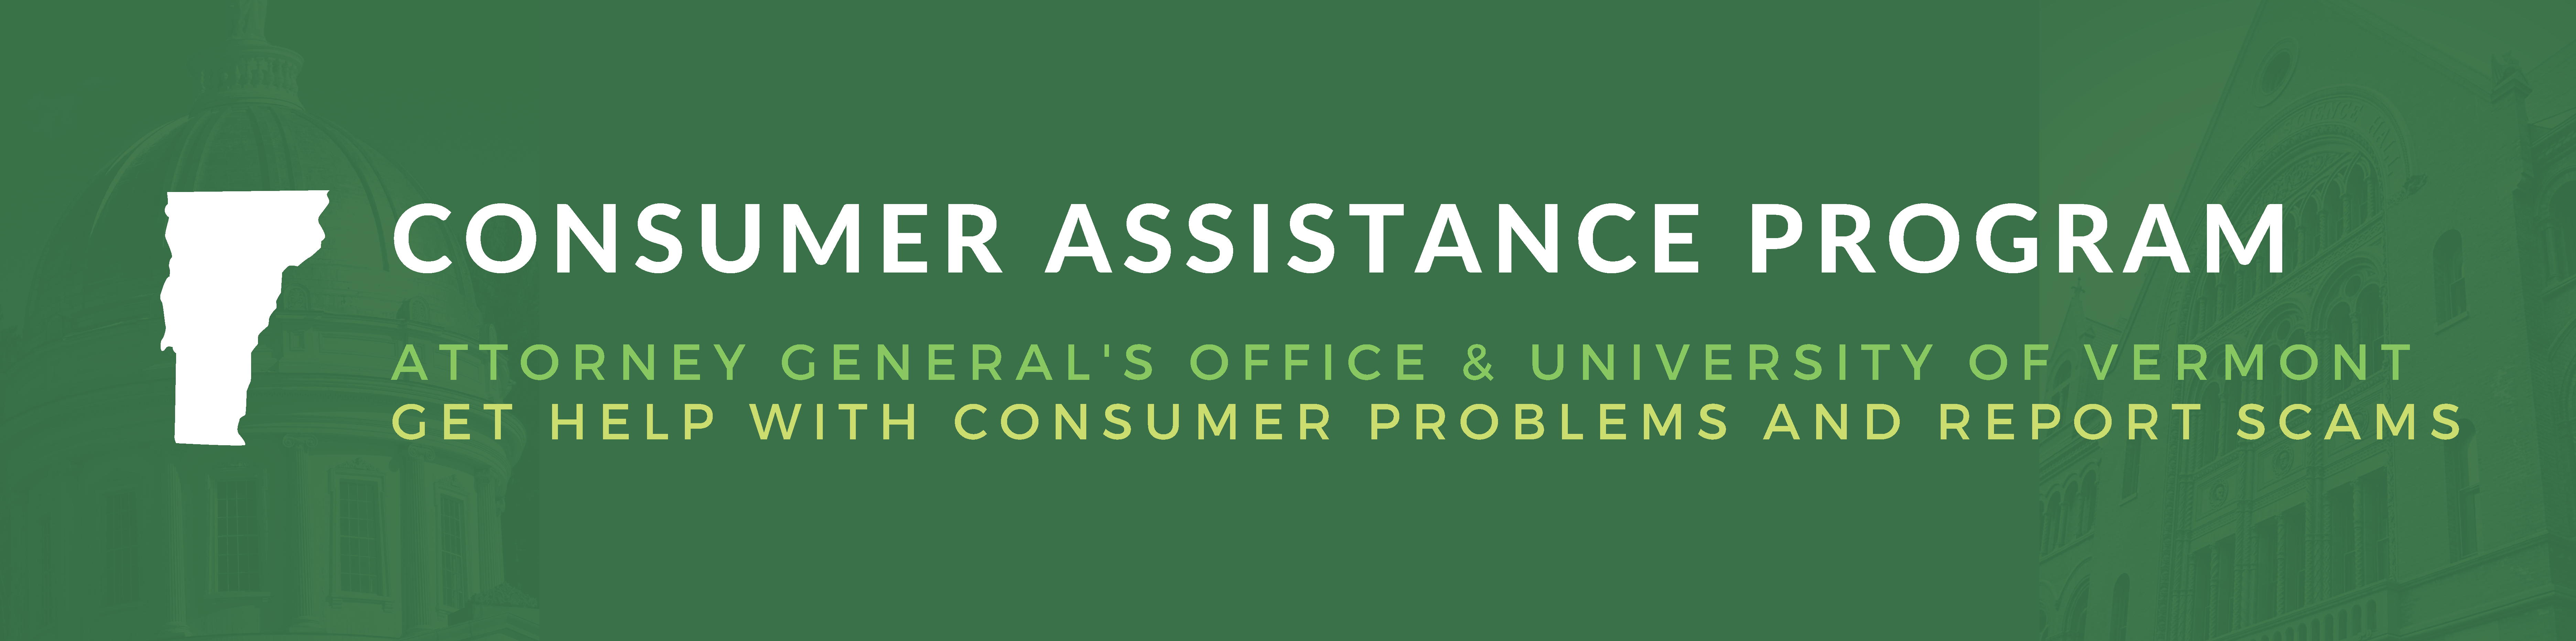 Consumer Assistance Program, Attorney Generals Office & University of Vermont. Get help with consumer problems and report scams